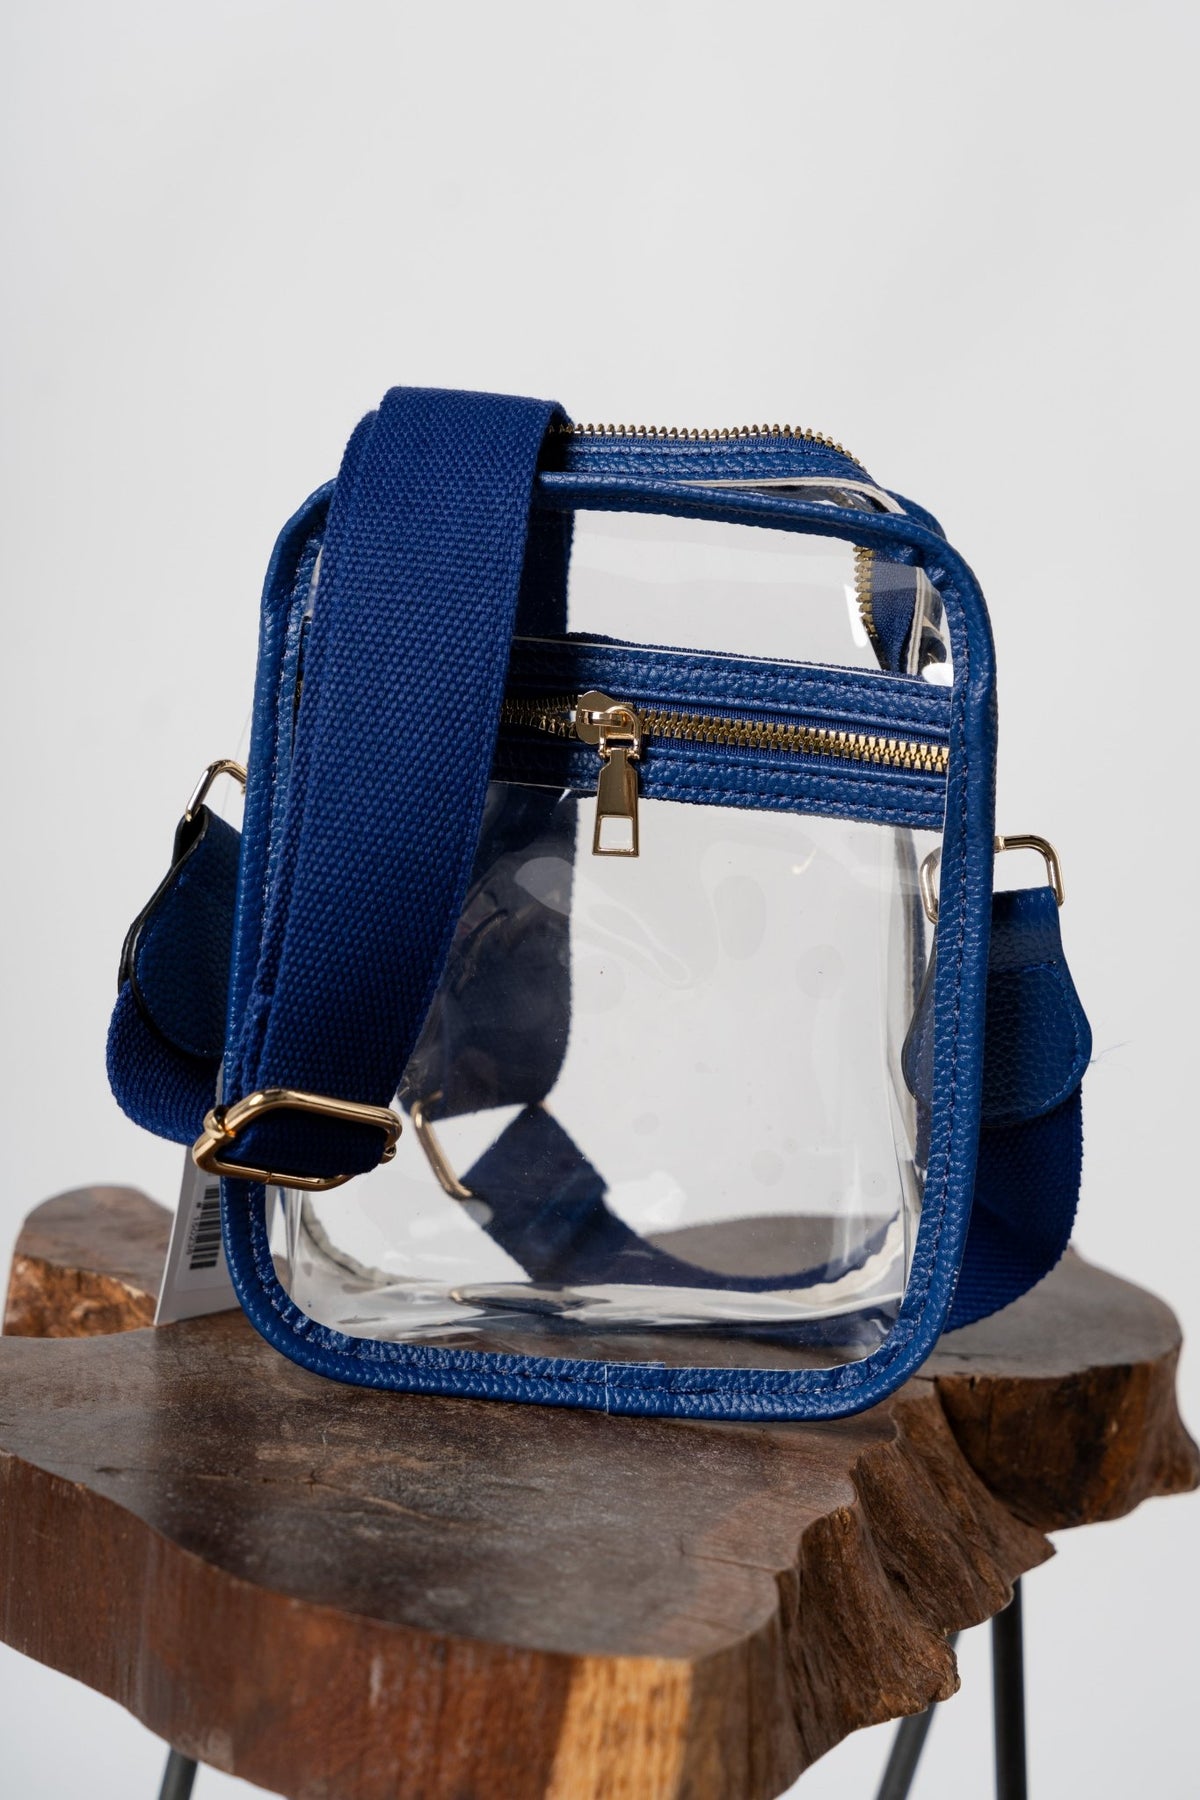 Clear crossbody stadium purse royal - Trendy Bags at Lush Fashion Lounge Boutique in Oklahoma City